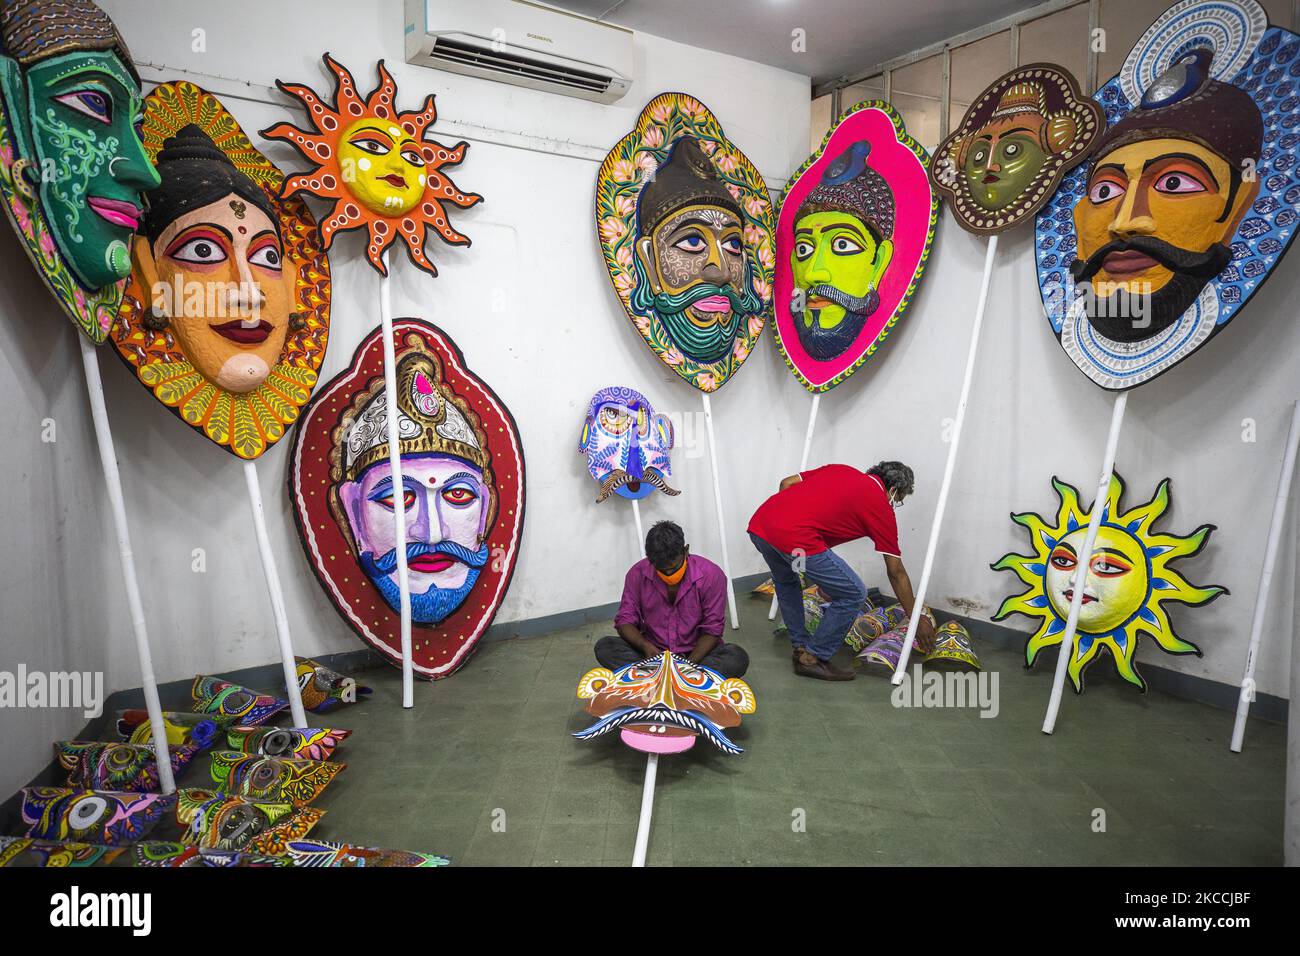 Student of Faculty of Fine Arts of Dhaka University painting traditional masks for preparation to celebrate upcoming Bengali New Year 1428 during the last day of first face of government-imposed lockdown as a preventive measure against the COVID-19 Coronavirus in Dhaka, Bangladesh, on April 11, 2021. The day will be celebrated on 14 April while the UNESCO added the Mangal Shobhajatra festival on Pahela Baishakh among other new items to the safeguarding intangible cultural heritage list. (Photo by Ahmed Salahuddin/NurPhoto) Stock Photo